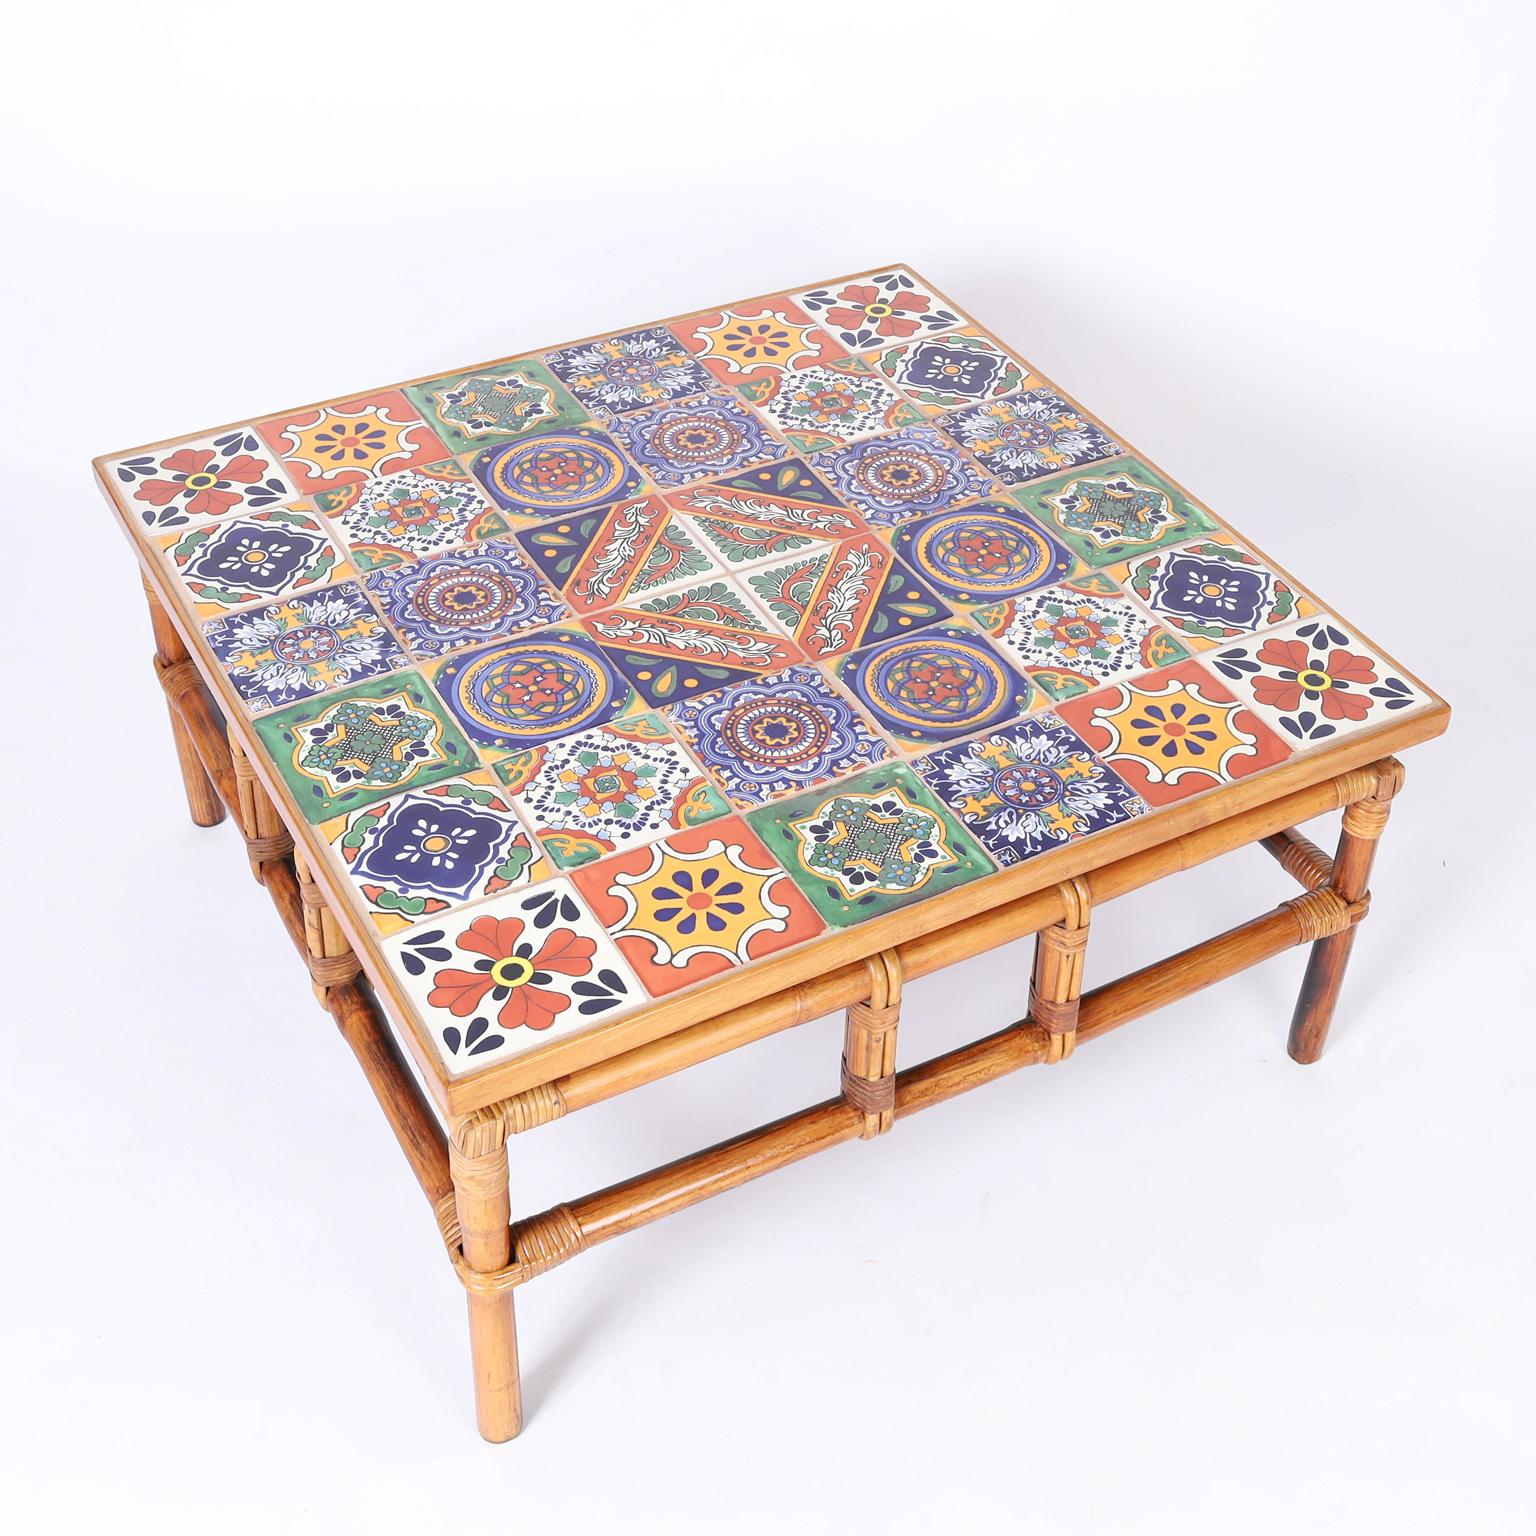 Mid century coffee table with distinctive Italian colorful ceramic tiles on the top over a faux bamboo frame with reed wrapped highlights. Possibly by McGuire.